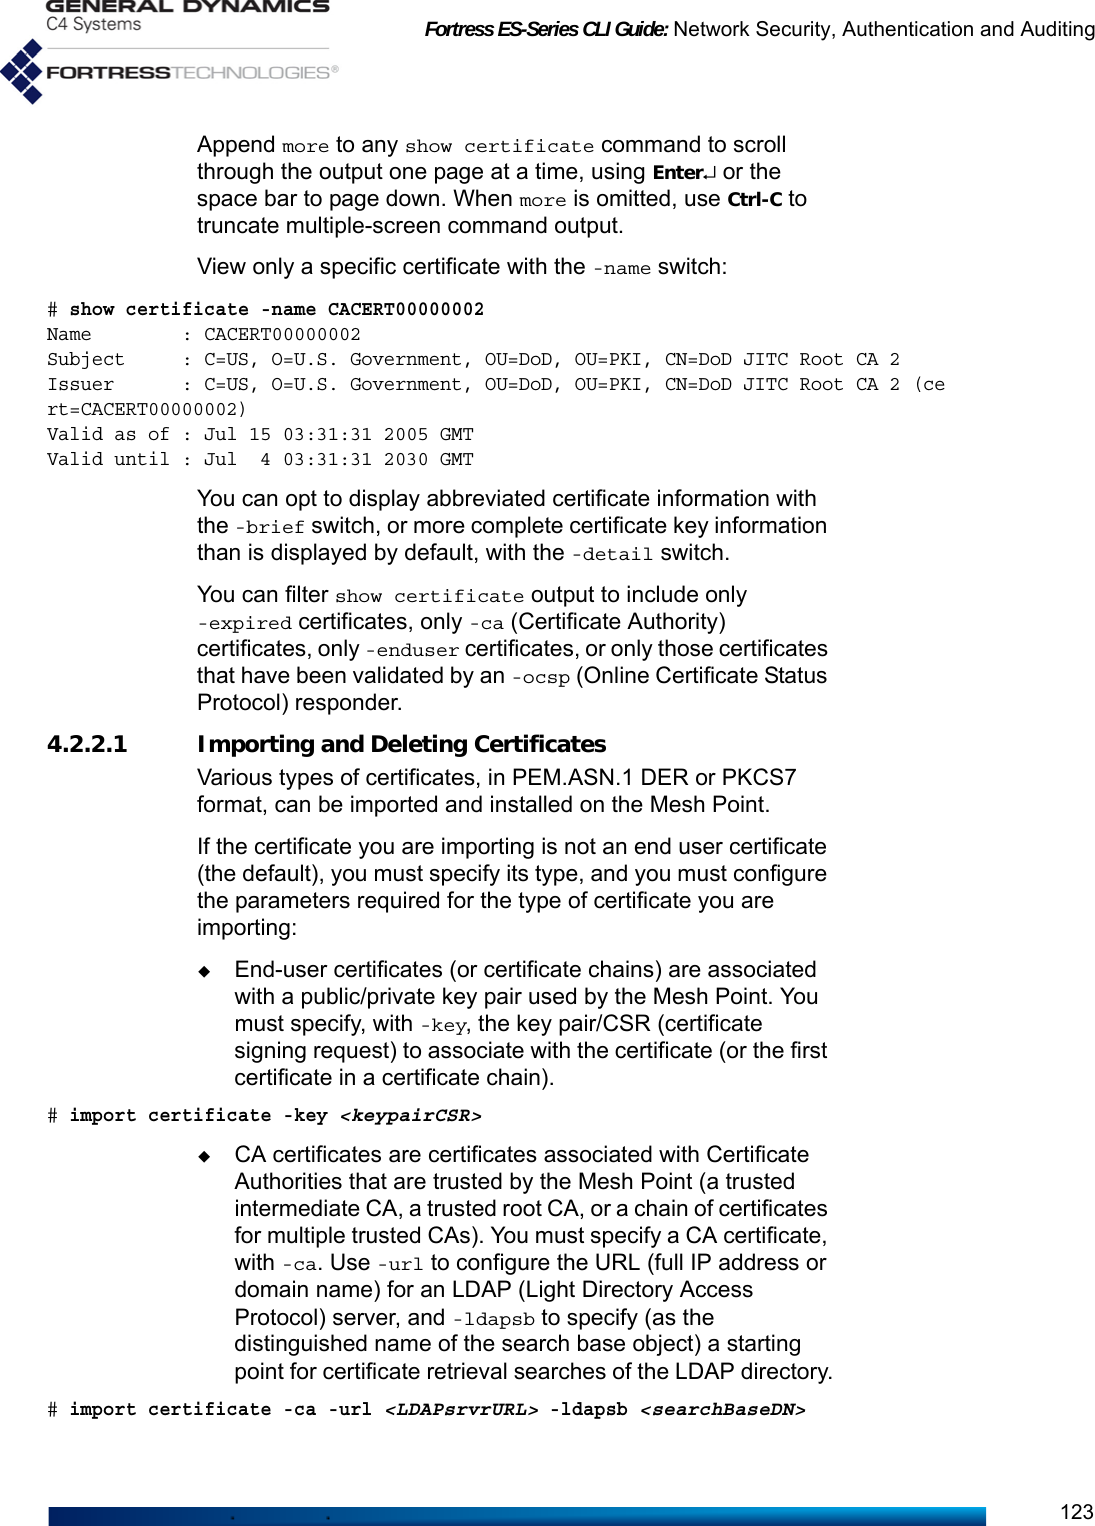 Fortress ES-Series CLI Guide: Network Security, Authentication and Auditing123Append more to any show certificate command to scroll through the output one page at a time, using Enter↵ or the space bar to page down. When more is omitted, use Ctrl-C to truncate multiple-screen command output.View only a specific certificate with the -name switch:# show certificate -name CACERT00000002Name        : CACERT00000002Subject     : C=US, O=U.S. Government, OU=DoD, OU=PKI, CN=DoD JITC Root CA 2Issuer      : C=US, O=U.S. Government, OU=DoD, OU=PKI, CN=DoD JITC Root CA 2 (cert=CACERT00000002)Valid as of : Jul 15 03:31:31 2005 GMTValid until : Jul  4 03:31:31 2030 GMTYou can opt to display abbreviated certificate information with the -brief switch, or more complete certificate key information than is displayed by default, with the -detail switch. You can filter show certificate output to include only -expired certificates, only -ca (Certificate Authority) certificates, only -enduser certificates, or only those certificates that have been validated by an -ocsp (Online Certificate Status Protocol) responder.    4.2.2.1 Importing and Deleting CertificatesVarious types of certificates, in PEM.ASN.1 DER or PKCS7 format, can be imported and installed on the Mesh Point. If the certificate you are importing is not an end user certificate (the default), you must specify its type, and you must configure the parameters required for the type of certificate you are importing:End-user certificates (or certificate chains) are associated with a public/private key pair used by the Mesh Point. You must specify, with -key, the key pair/CSR (certificate signing request) to associate with the certificate (or the first certificate in a certificate chain).# import certificate -key &lt;keypairCSR&gt;CA certificates are certificates associated with Certificate Authorities that are trusted by the Mesh Point (a trusted intermediate CA, a trusted root CA, or a chain of certificates for multiple trusted CAs). You must specify a CA certificate, with -ca. Use -url to configure the URL (full IP address or domain name) for an LDAP (Light Directory Access Protocol) server, and -ldapsb to specify (as the distinguished name of the search base object) a starting point for certificate retrieval searches of the LDAP directory.# import certificate -ca -url &lt;LDAPsrvrURL&gt; -ldapsb &lt;searchBaseDN&gt;